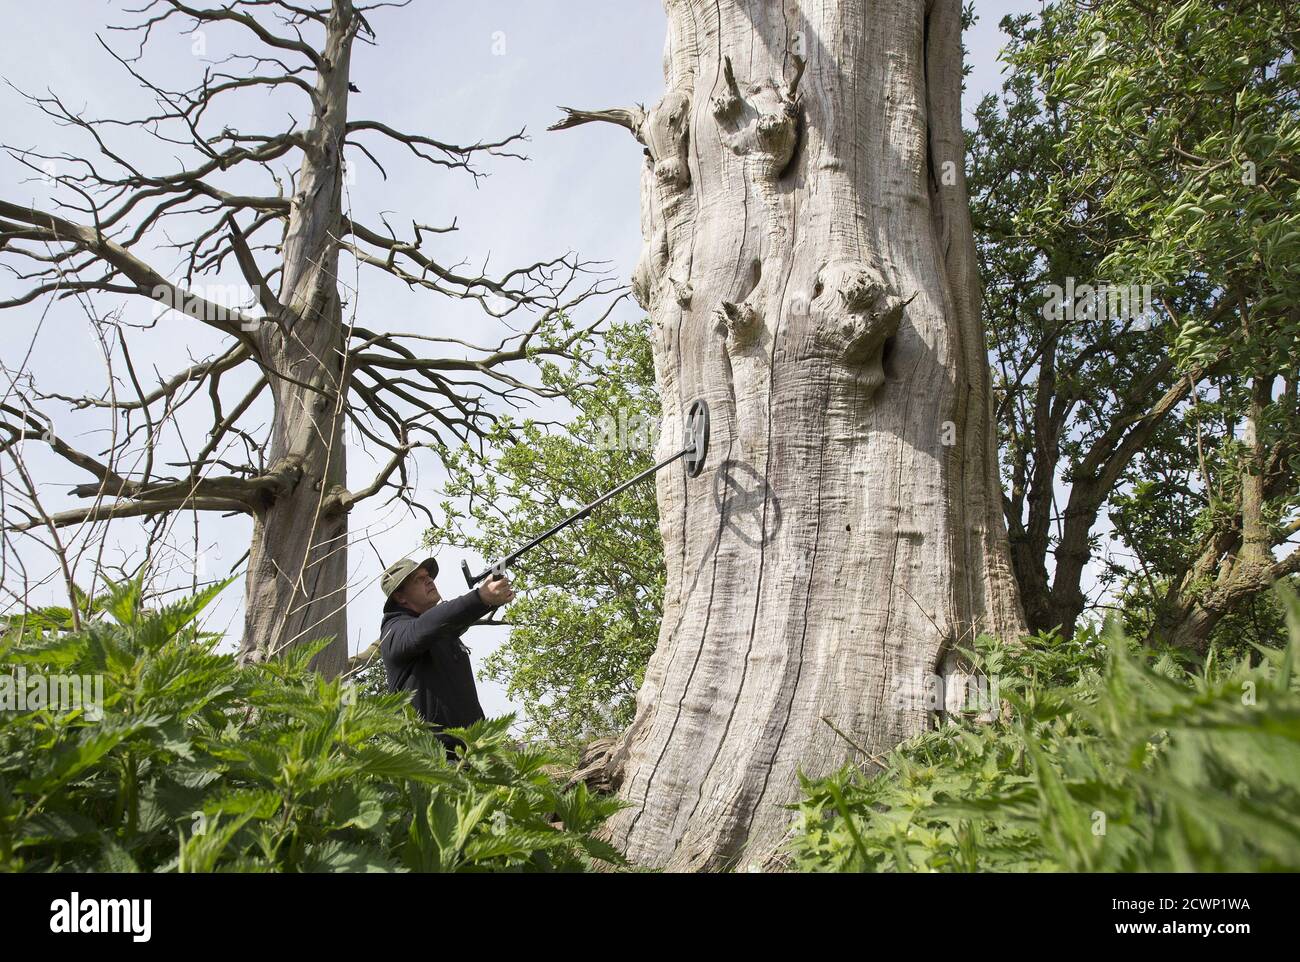 Metal detector enthusiast Gary Craig from Scotland searches for bullets trapped inside a tree as part of a landmark archaeological research campaign called 'Waterloo Uncovered' in Braine L'Alleud, Belgium April 29, 2015. 'Waterloo Uncovered', which aims to explore the battlefield of Waterloo in the bicentennial year of the Battle of Waterloo, is conducted by army veterans, some wounded in recent military campaigns, working alongside leading battlefield archaeologists and military historians.  REUTERS/Yves Herman Stock Photo